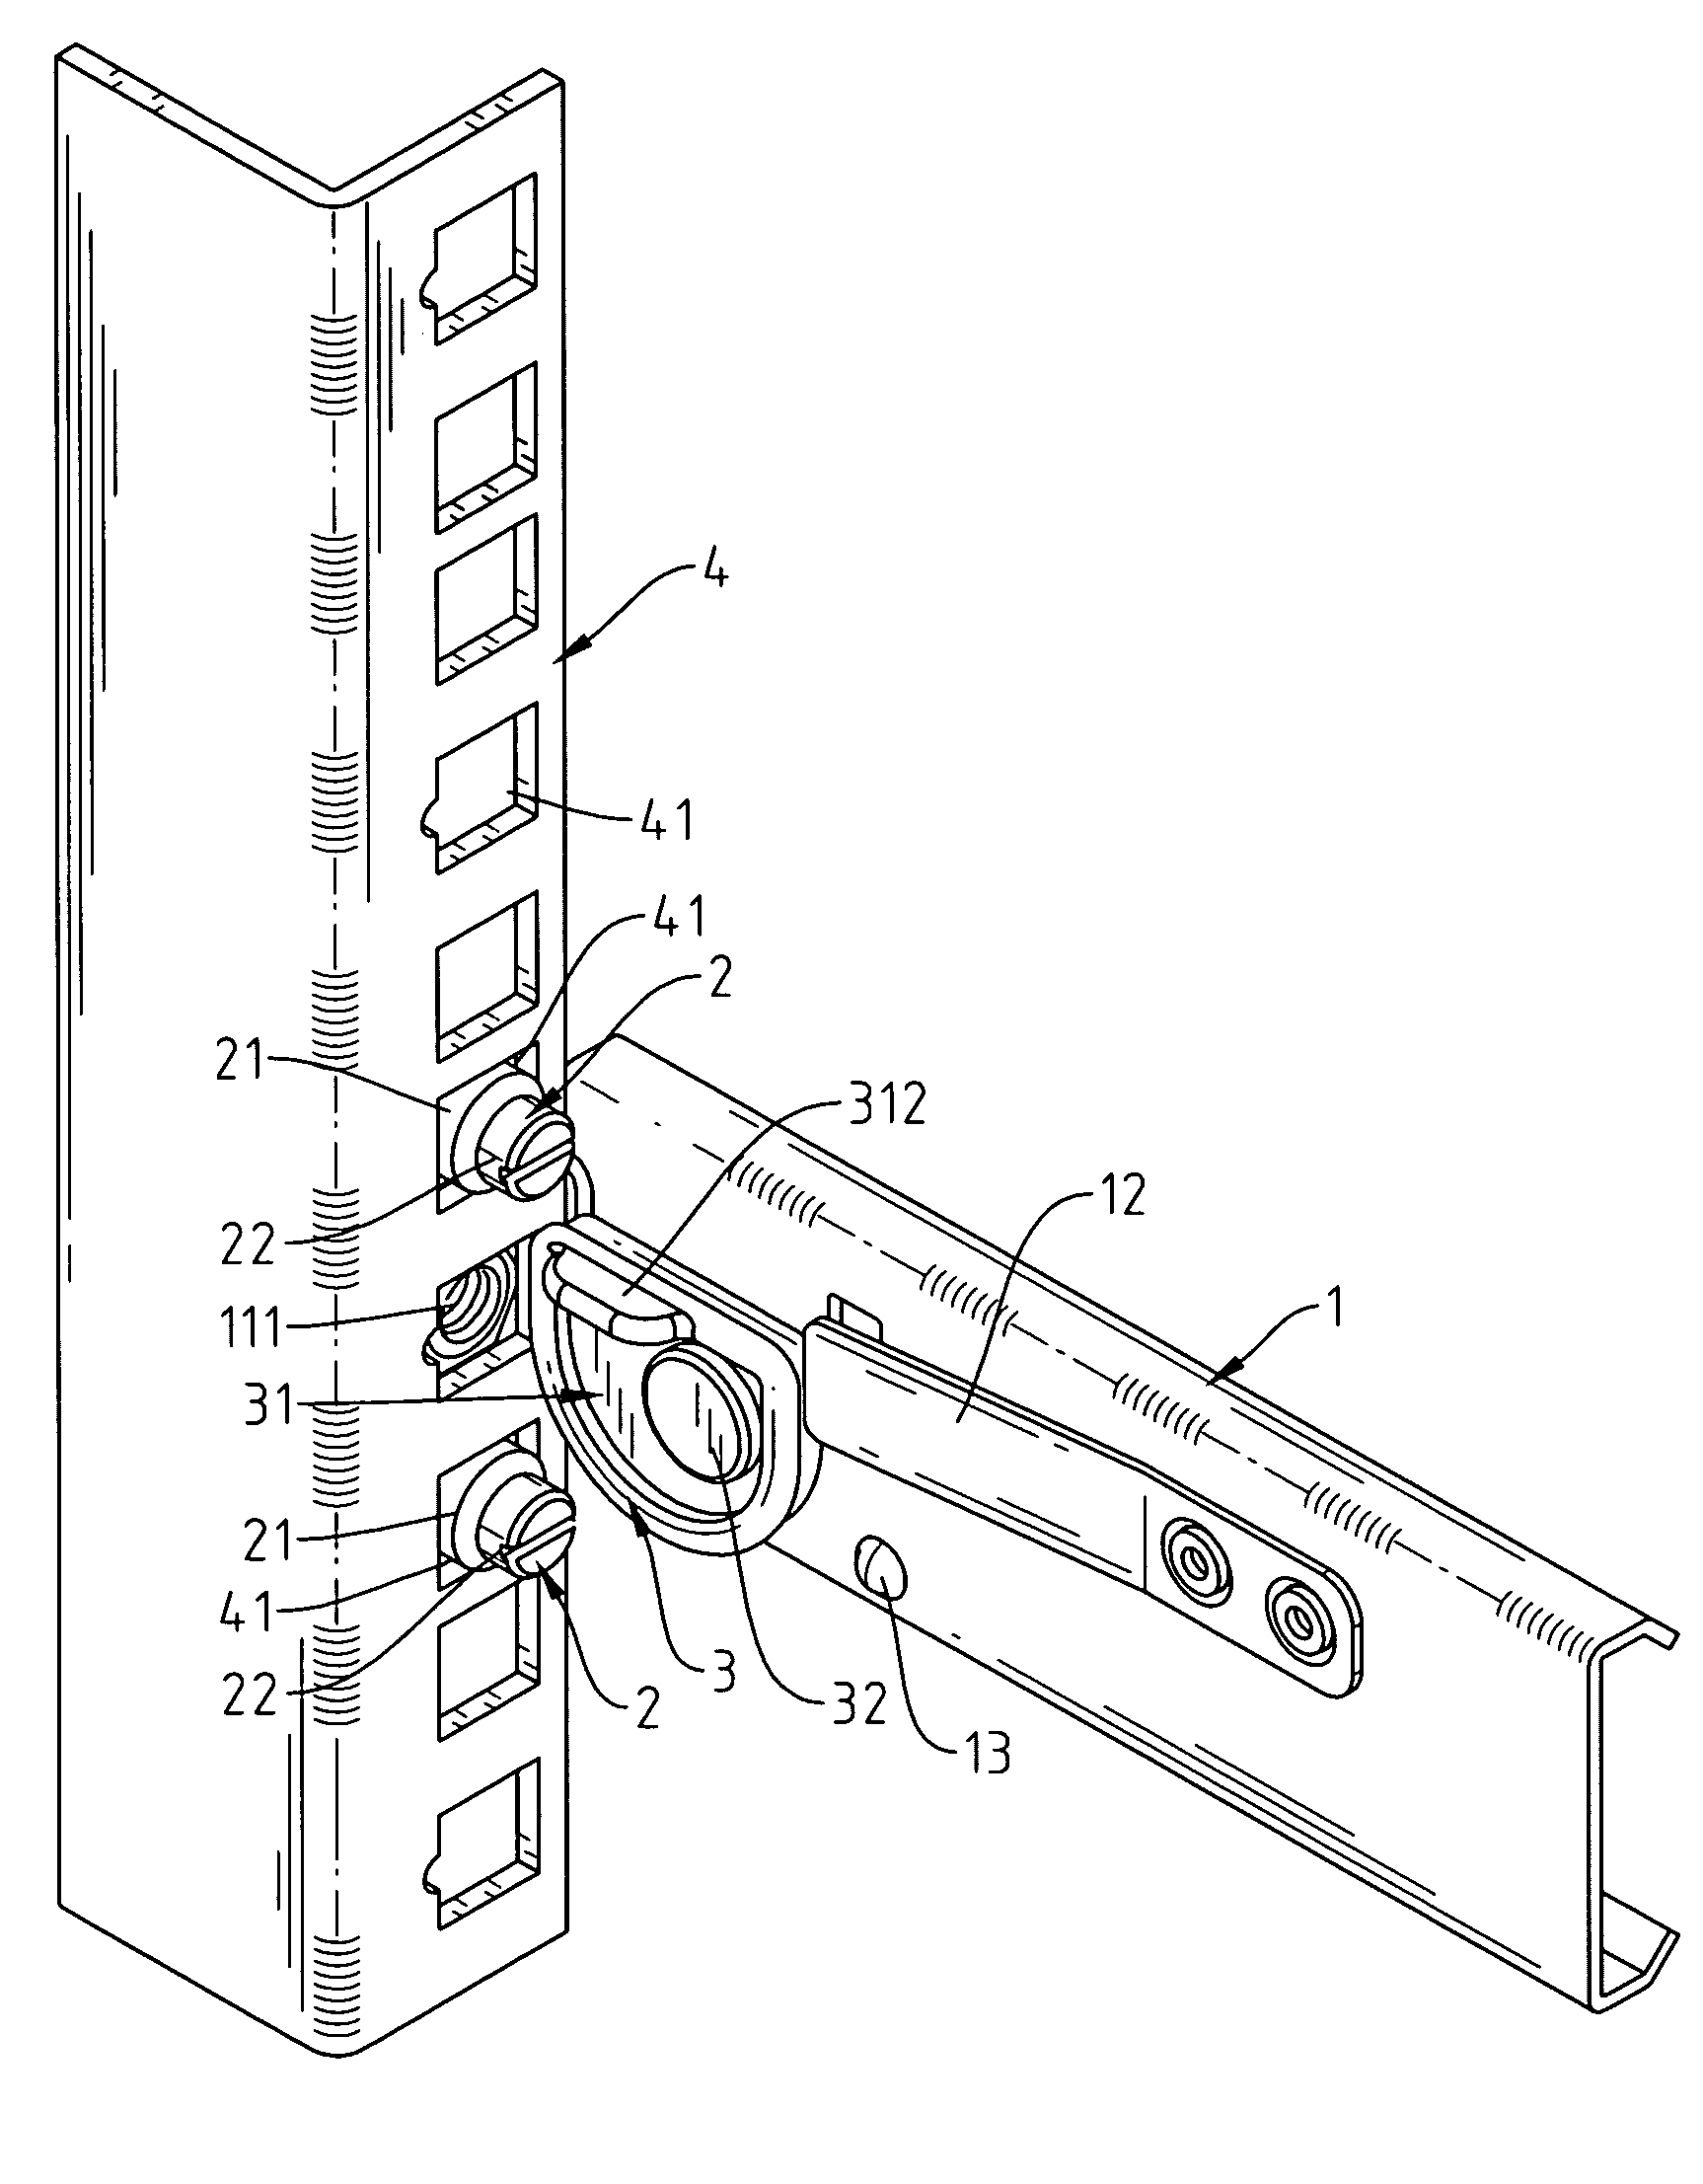 Rotary-type fastening structure